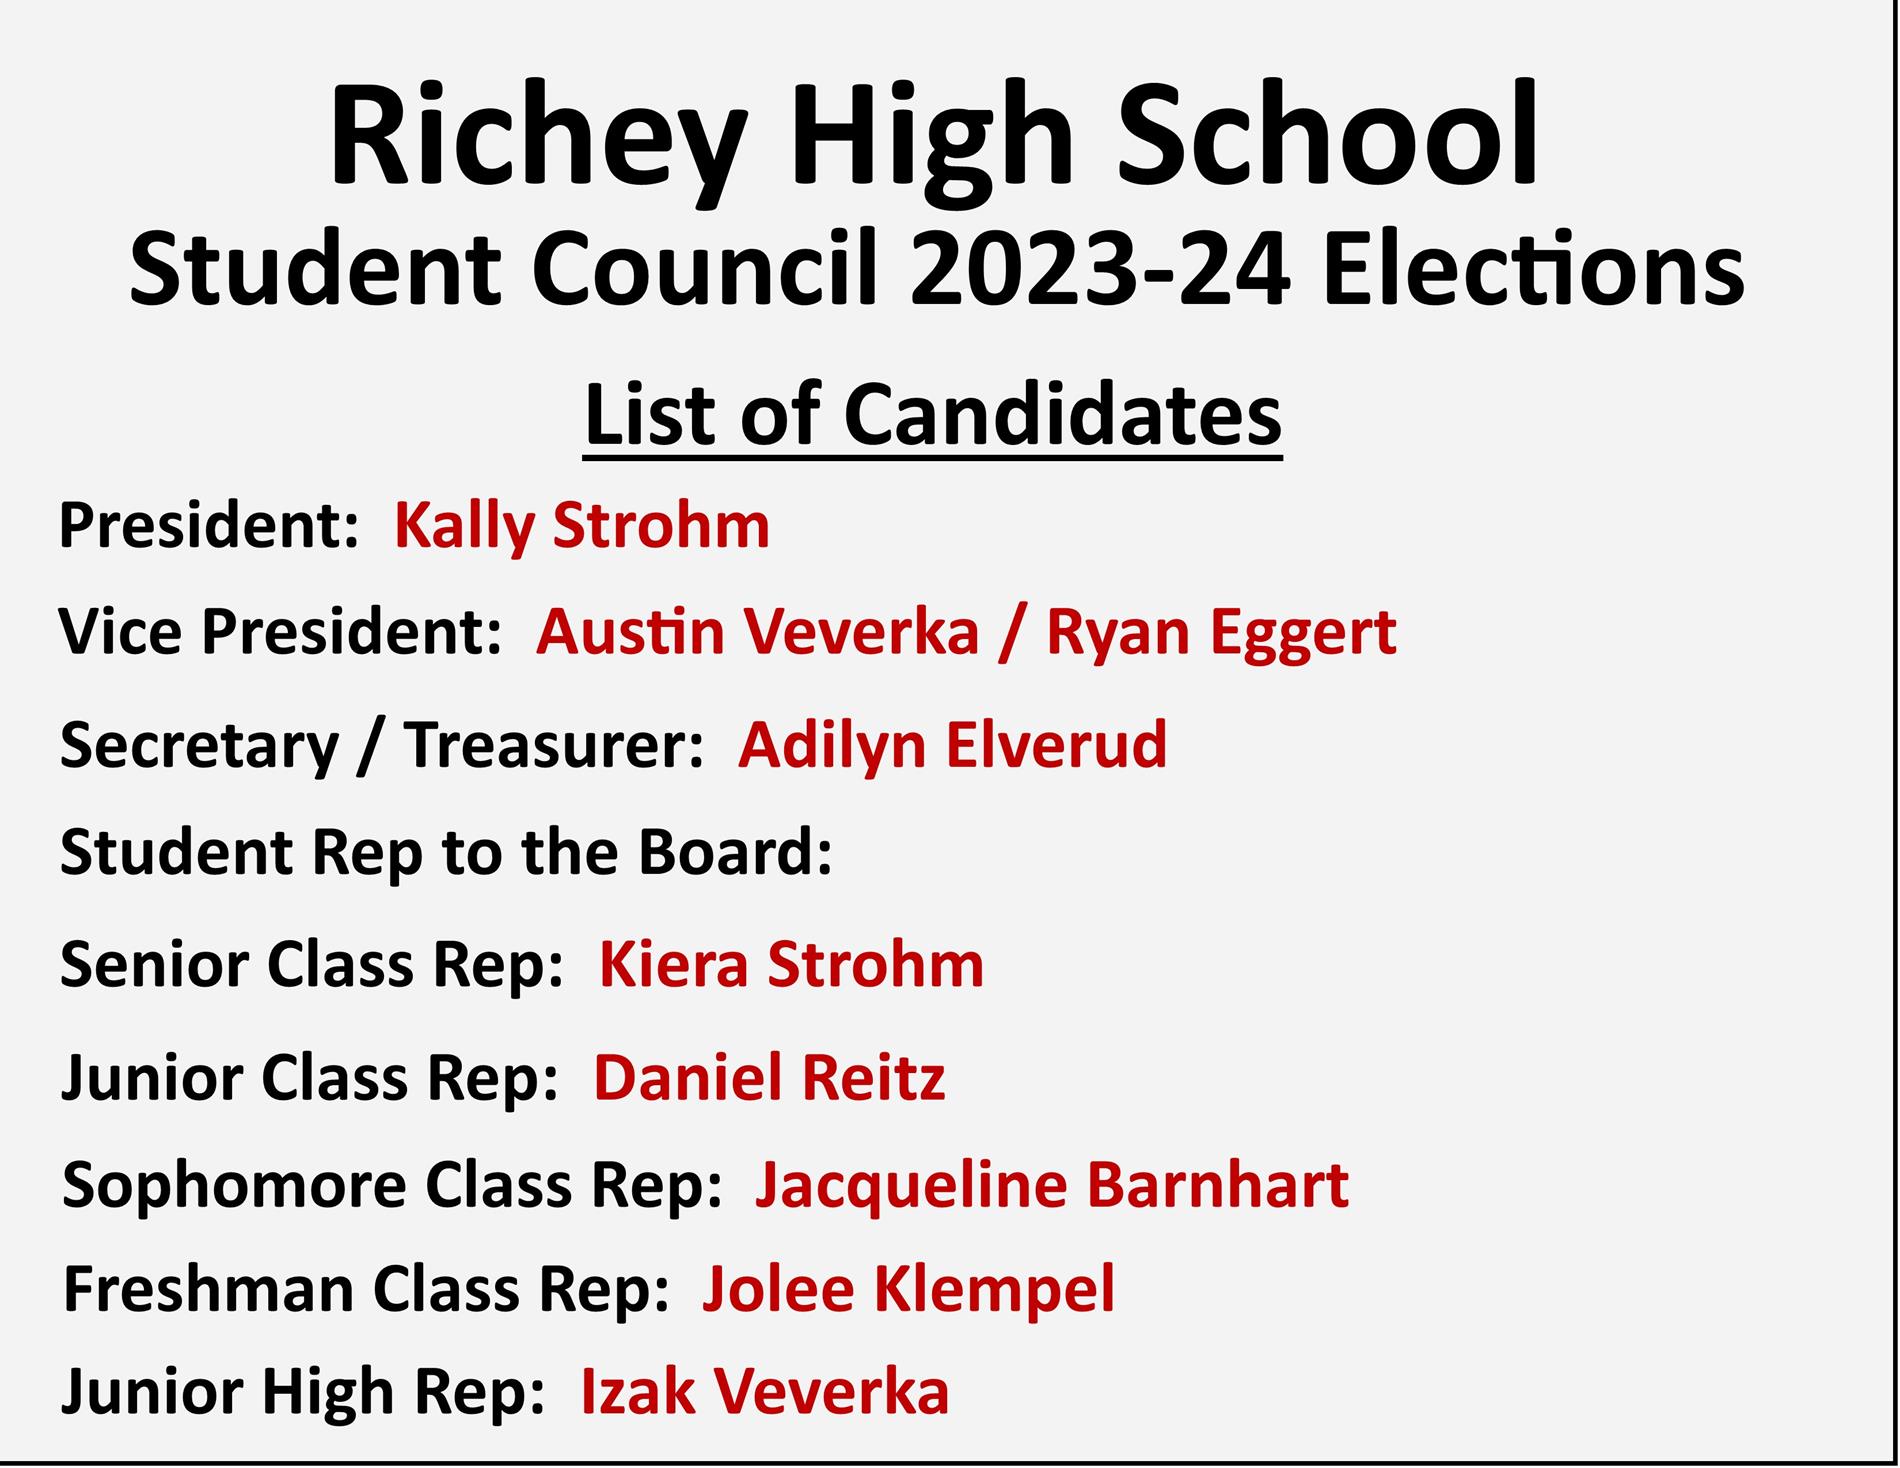 2023-24 Student Council Elections